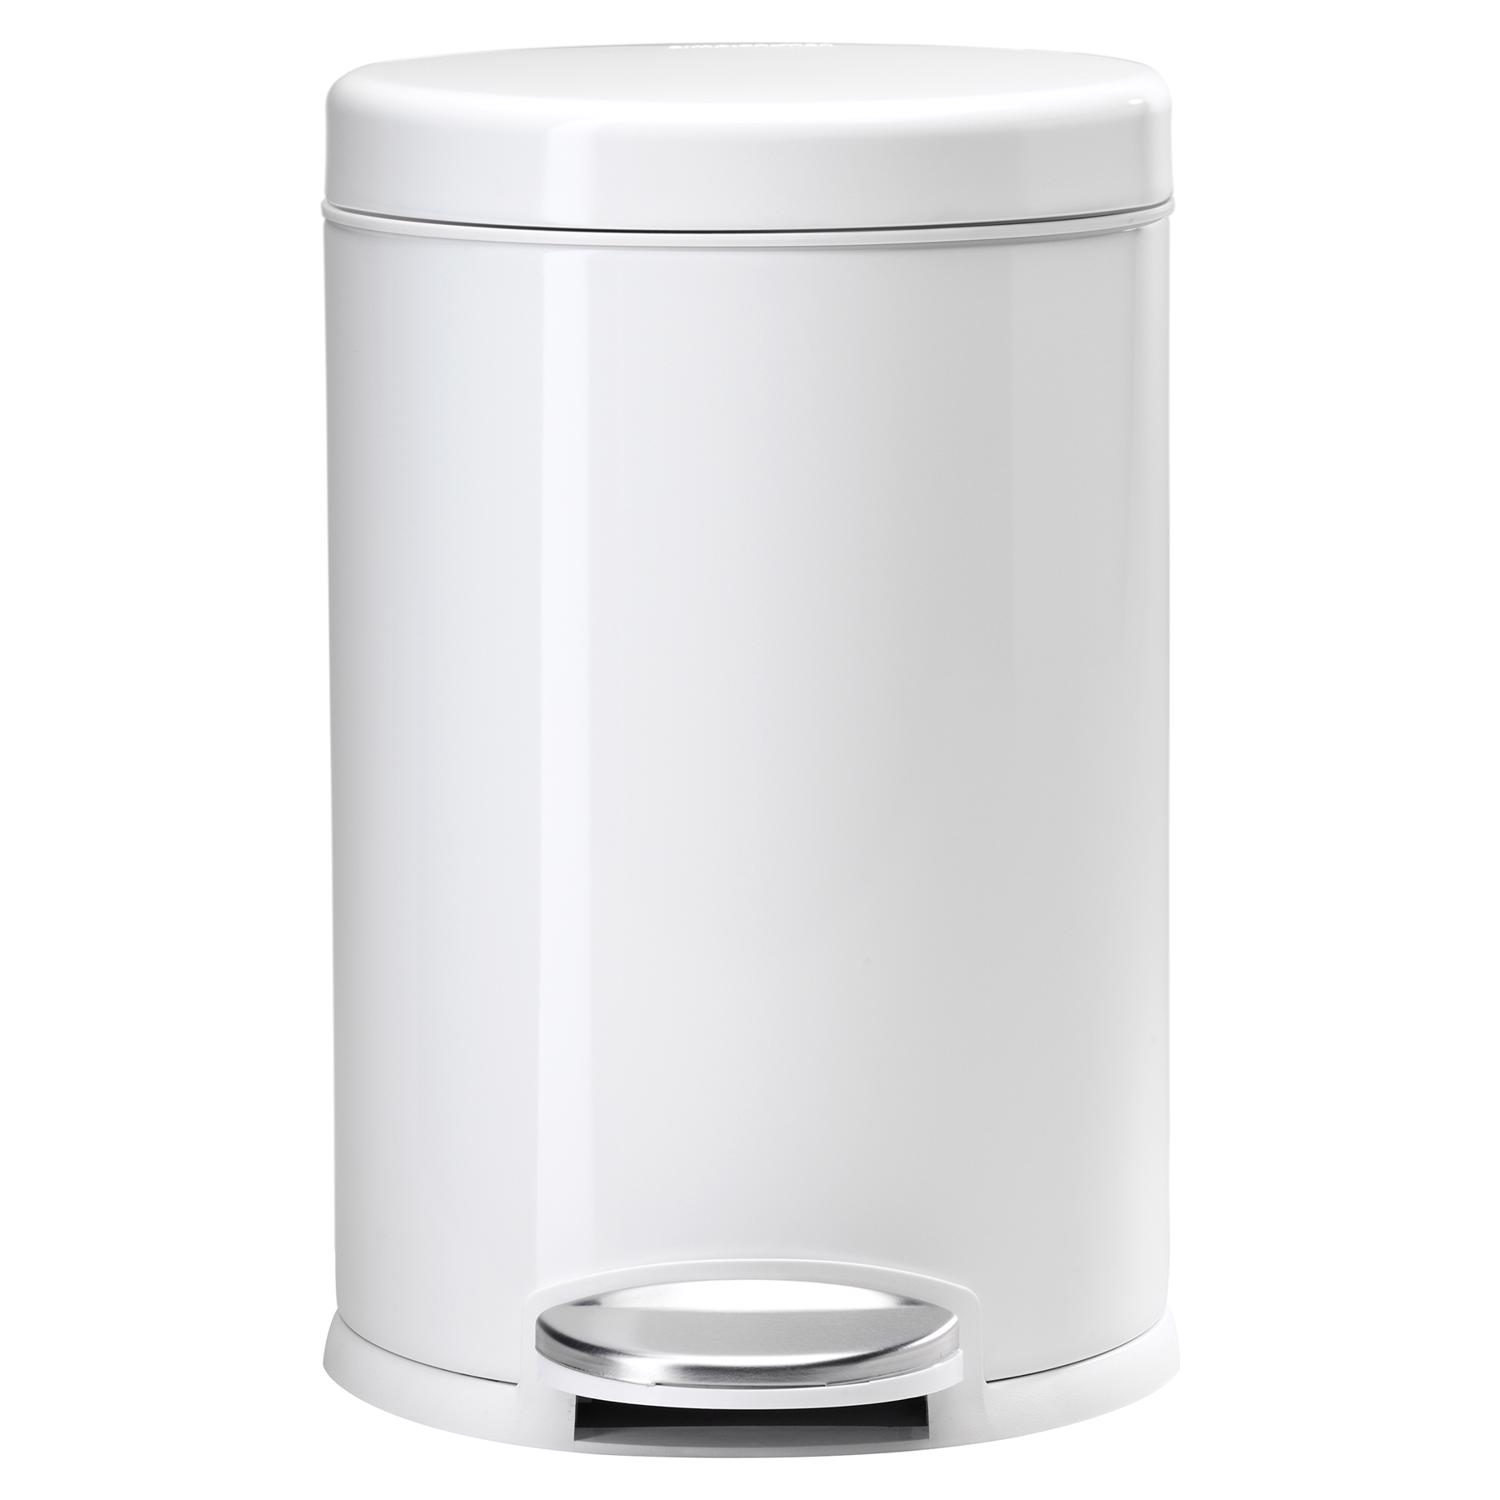 Photos - Other interior and decor Simplehuman 4.5 L White Stainless Steel Step On Trash Can CW1853 